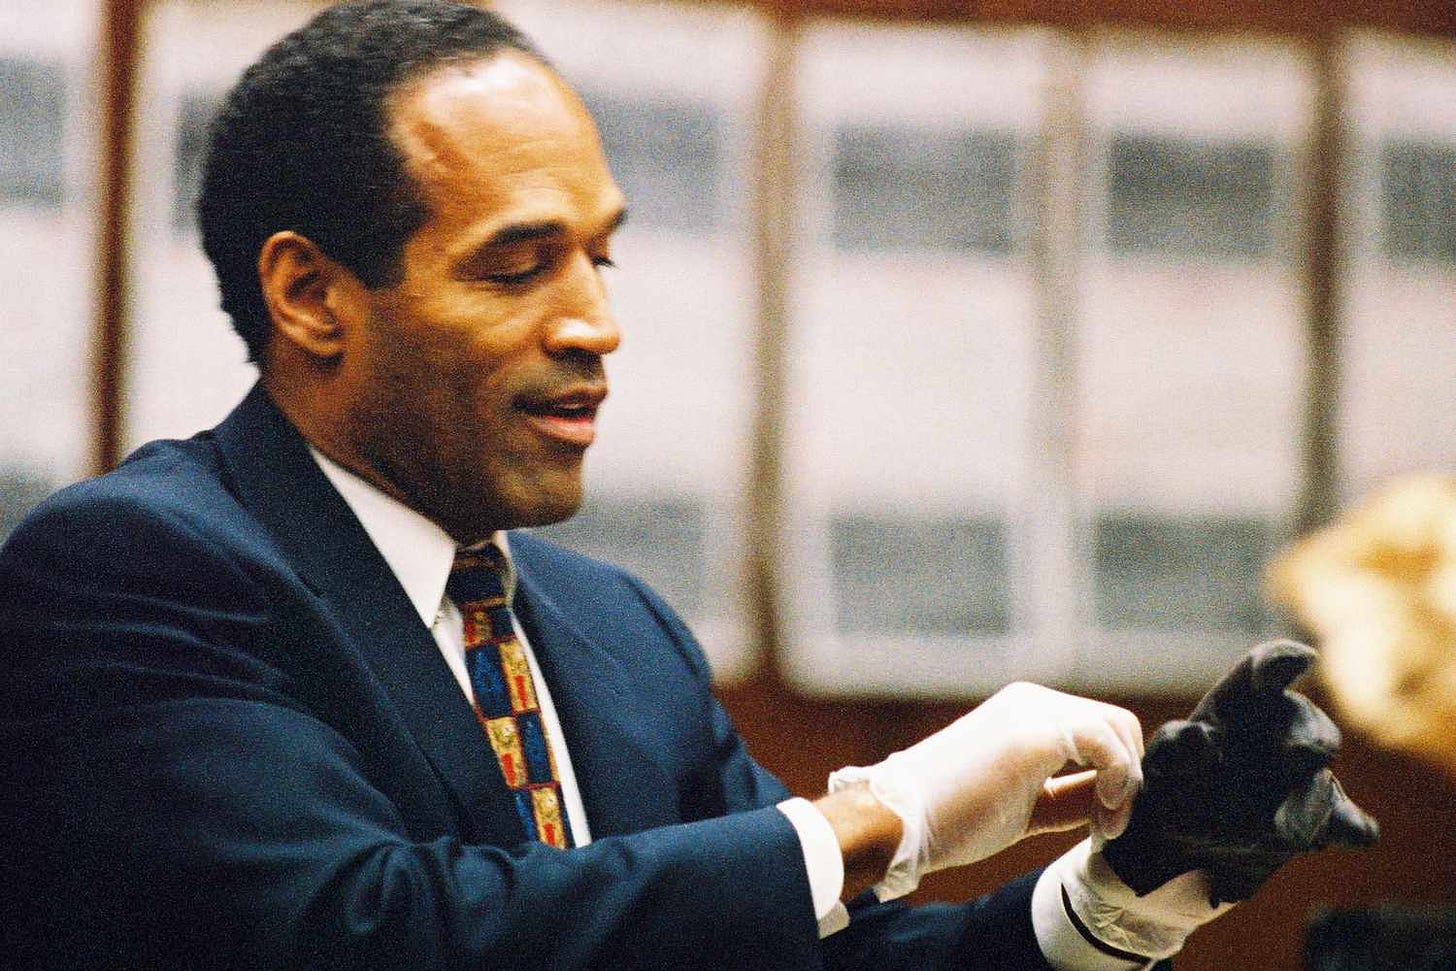 Everything to Know About the Infamous Glove in O.J. Simpson's Trial